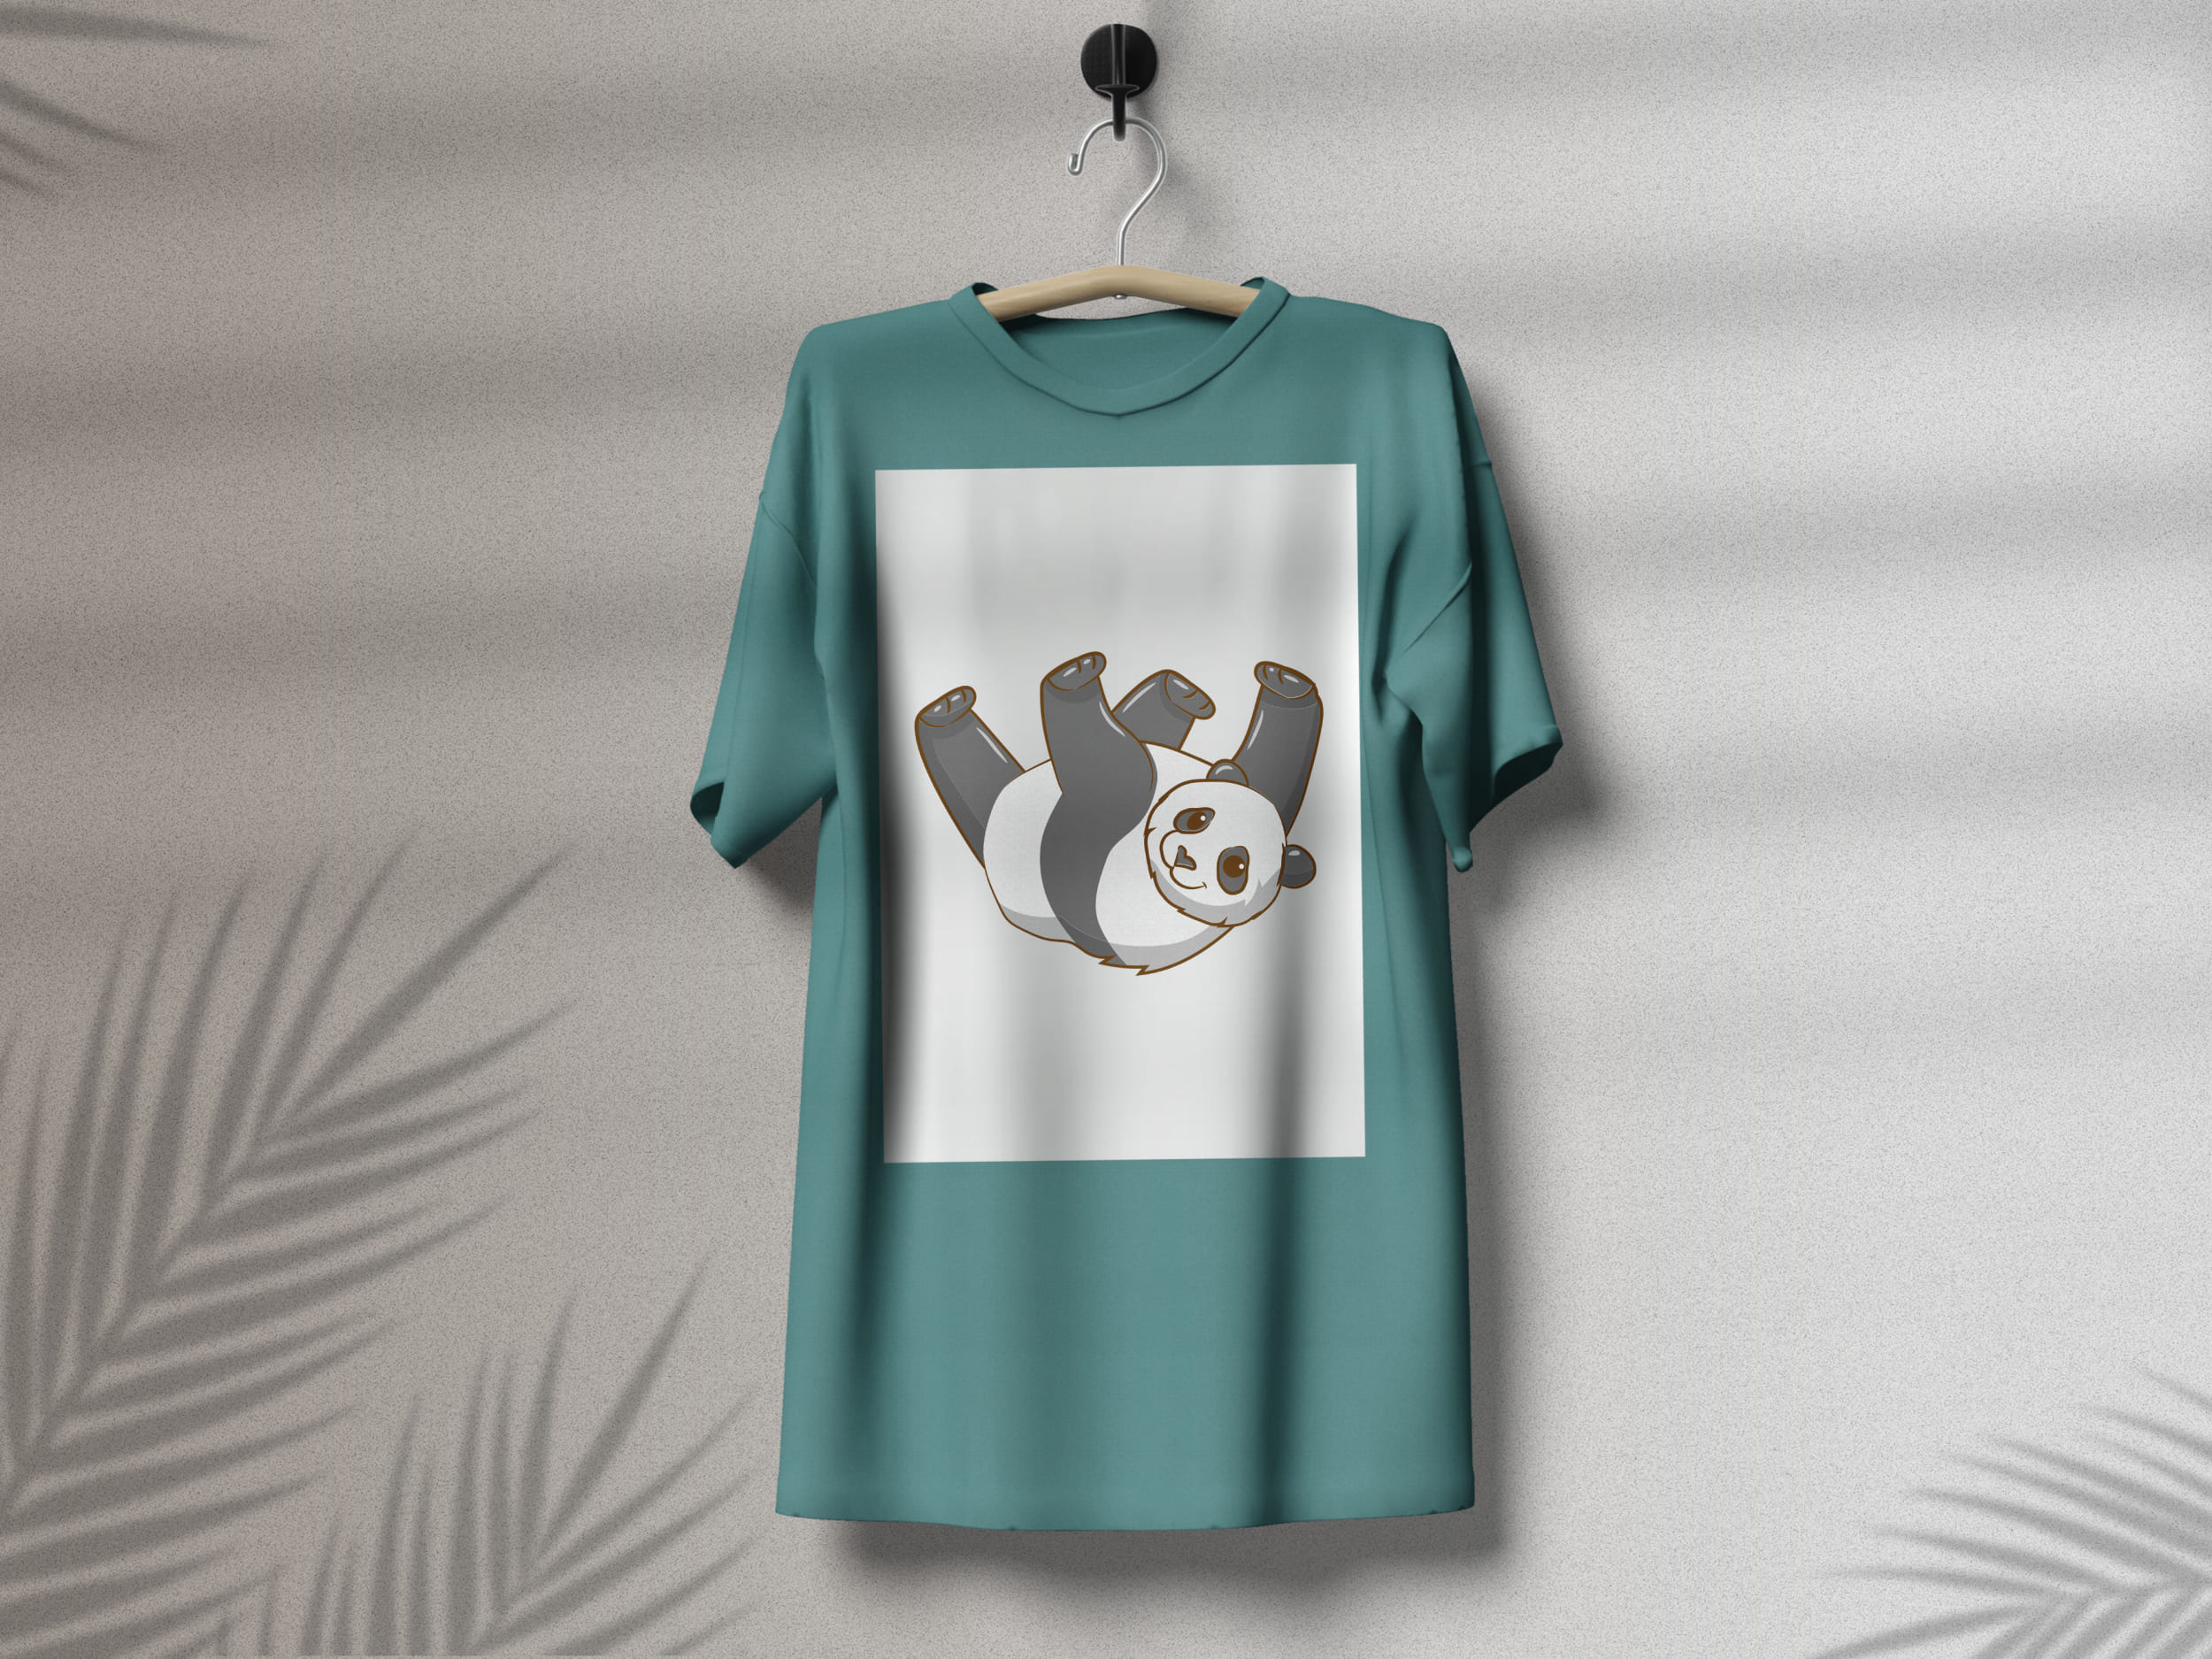 Turquoise t-shirt with a happy panda on a white background, on a hanger on a gray background